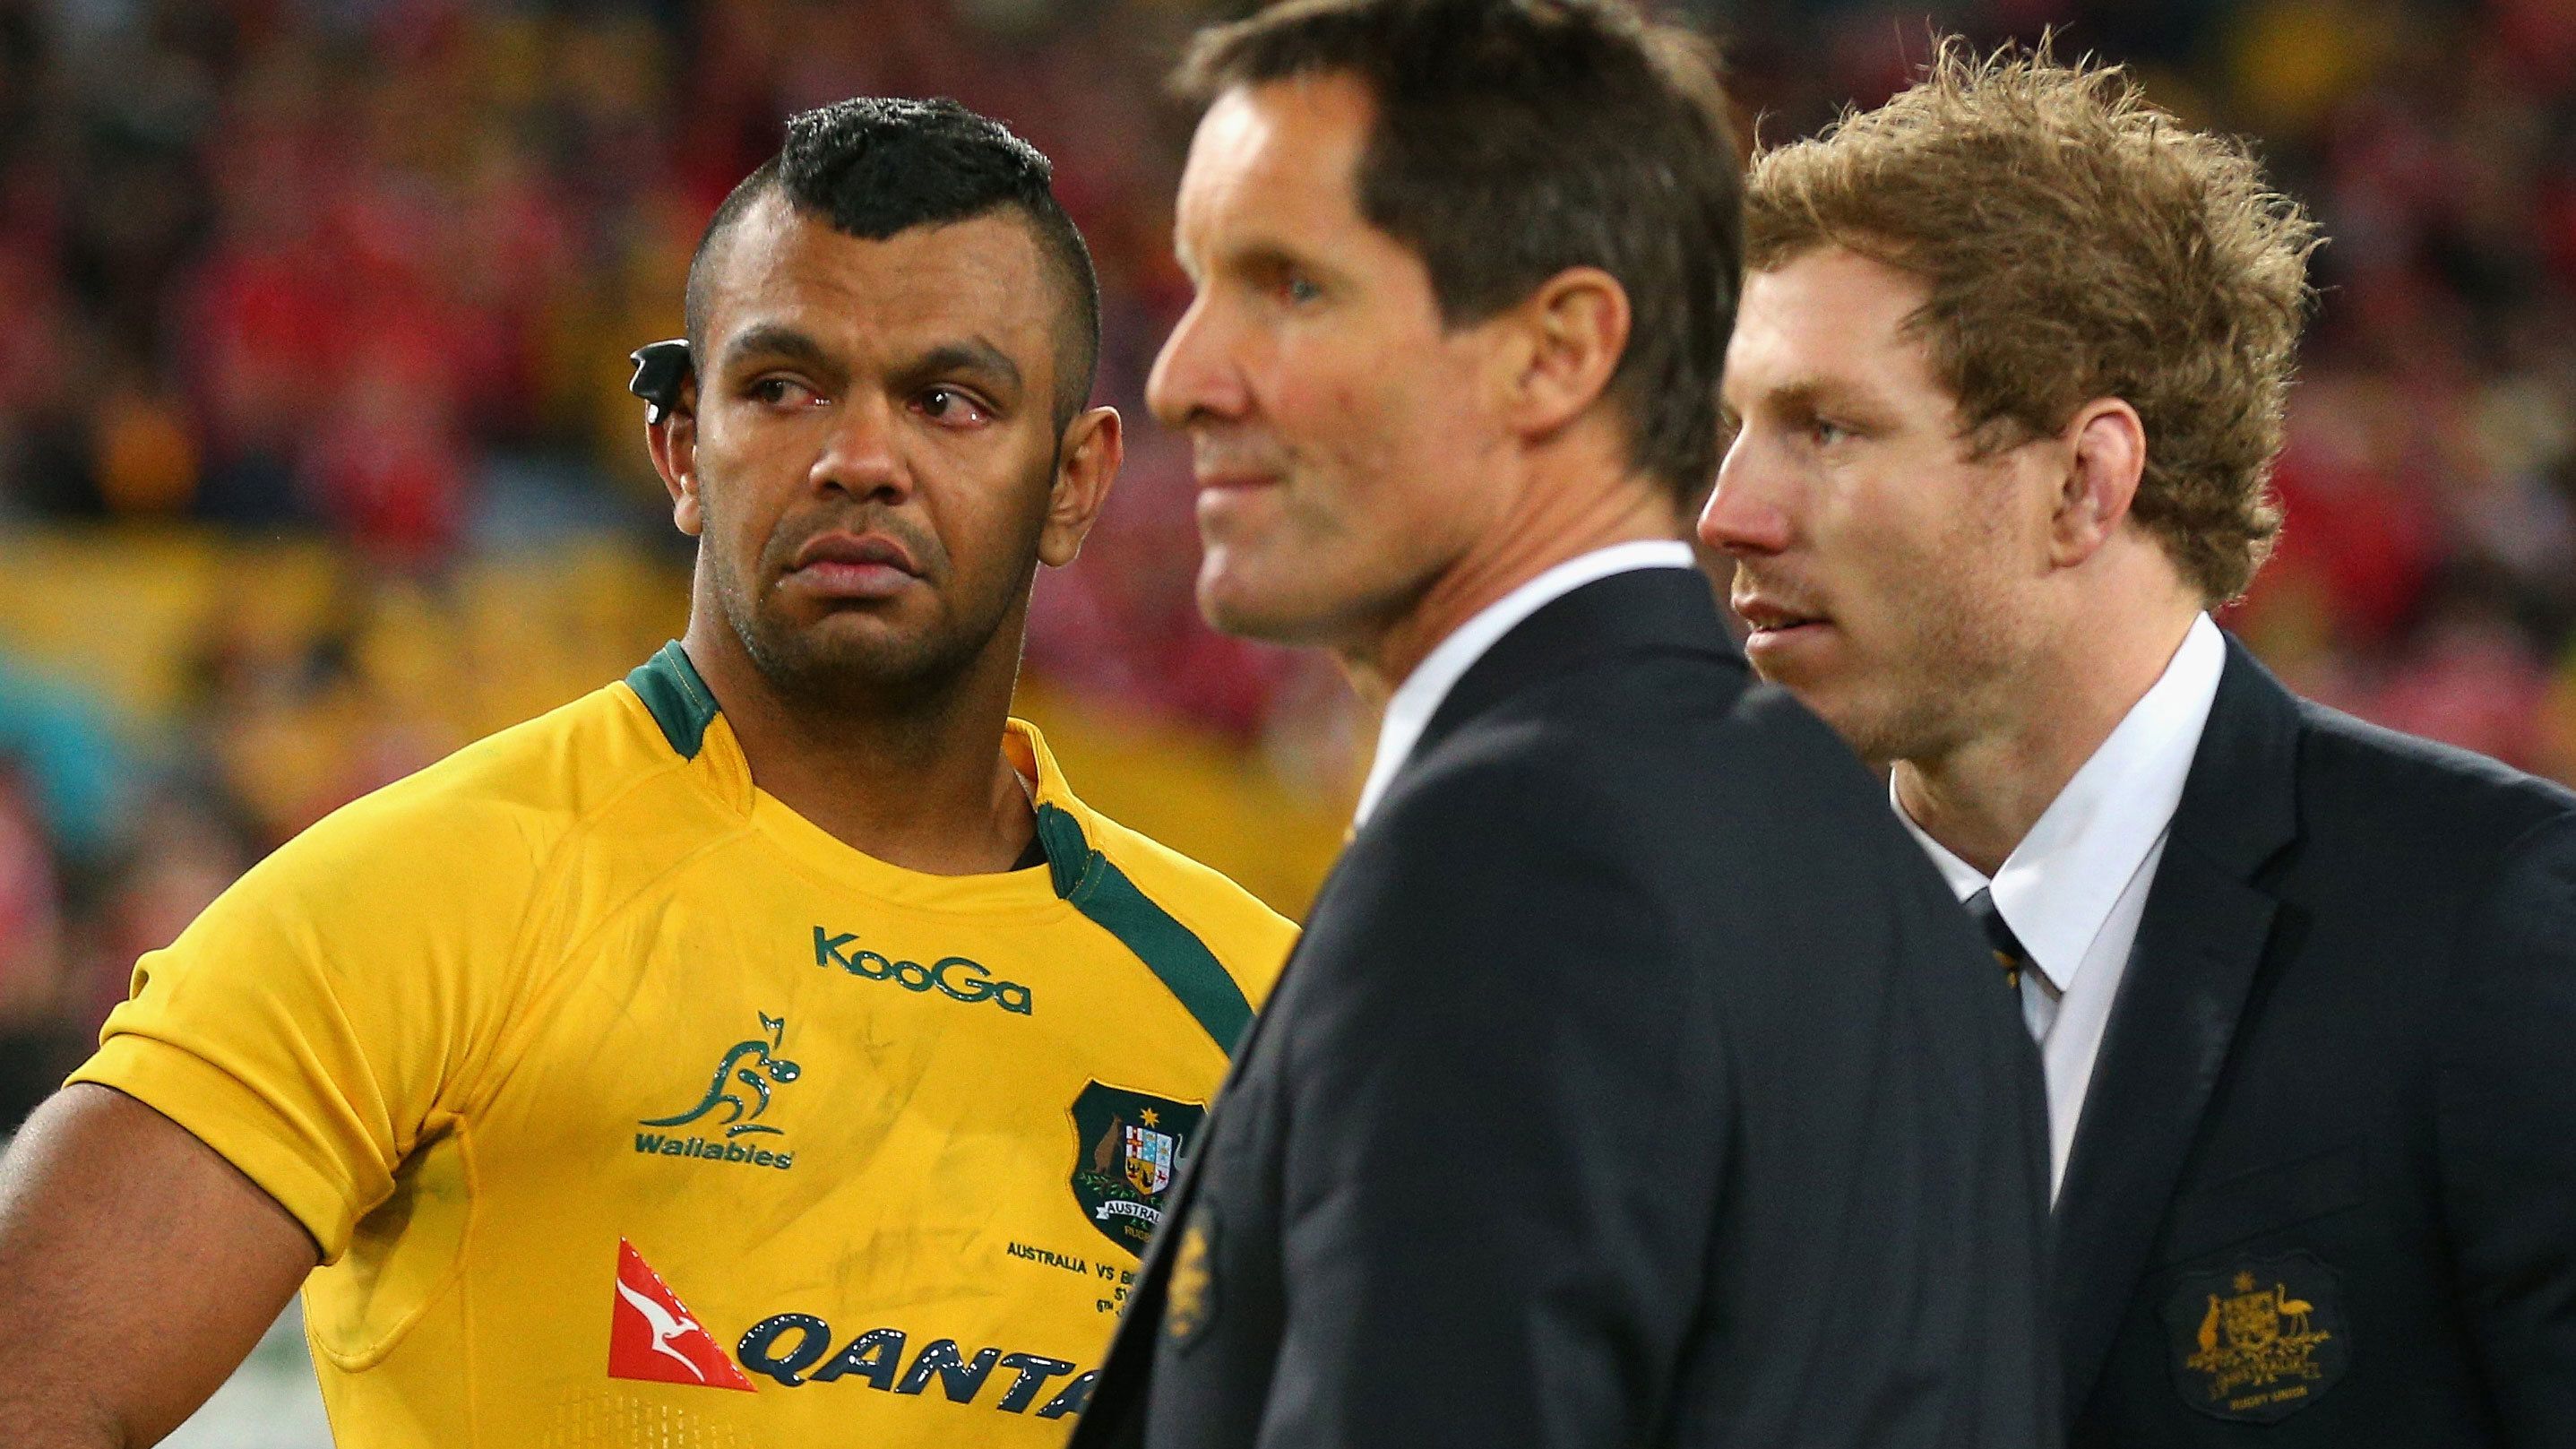 Wallabies star Kurtley Beale with coach Robbie Deans and David Pocock after a loss to the British &amp; Irish Lions at ANZ Stadium on July 6, 2013 in Sydney, Australia.